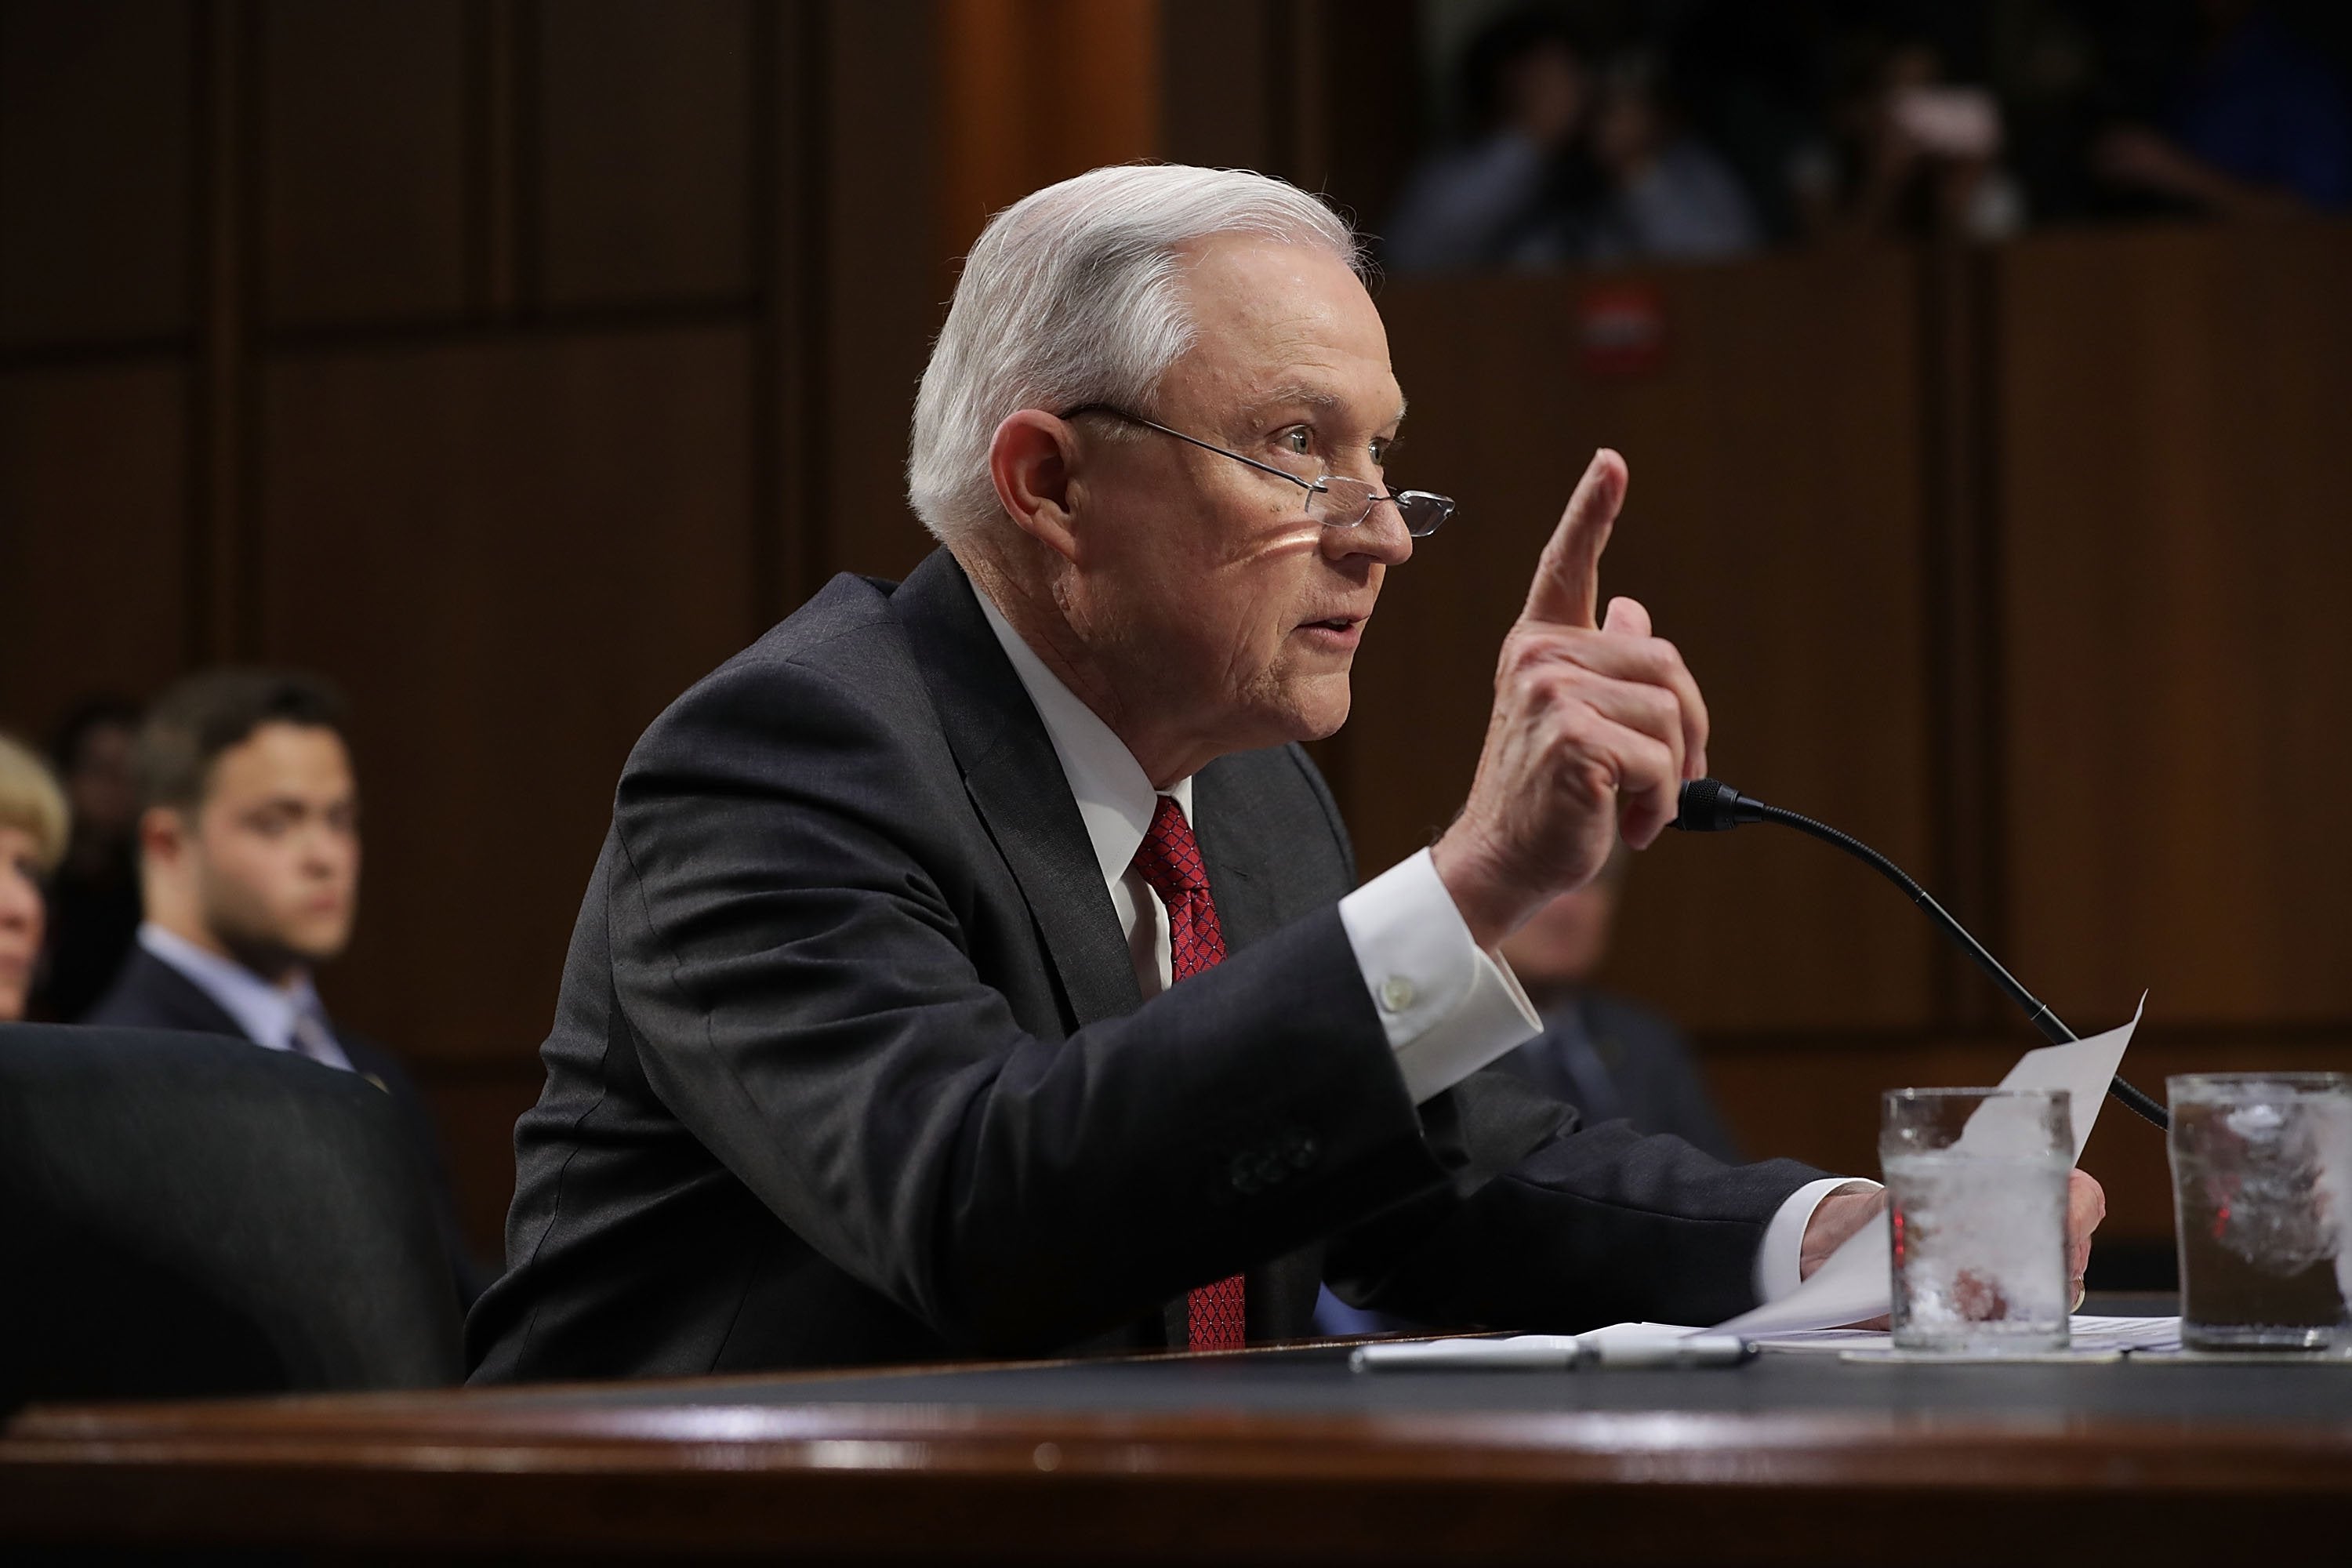 Jeff Sessions Vehemently Denies Improper Meetings With Russia
